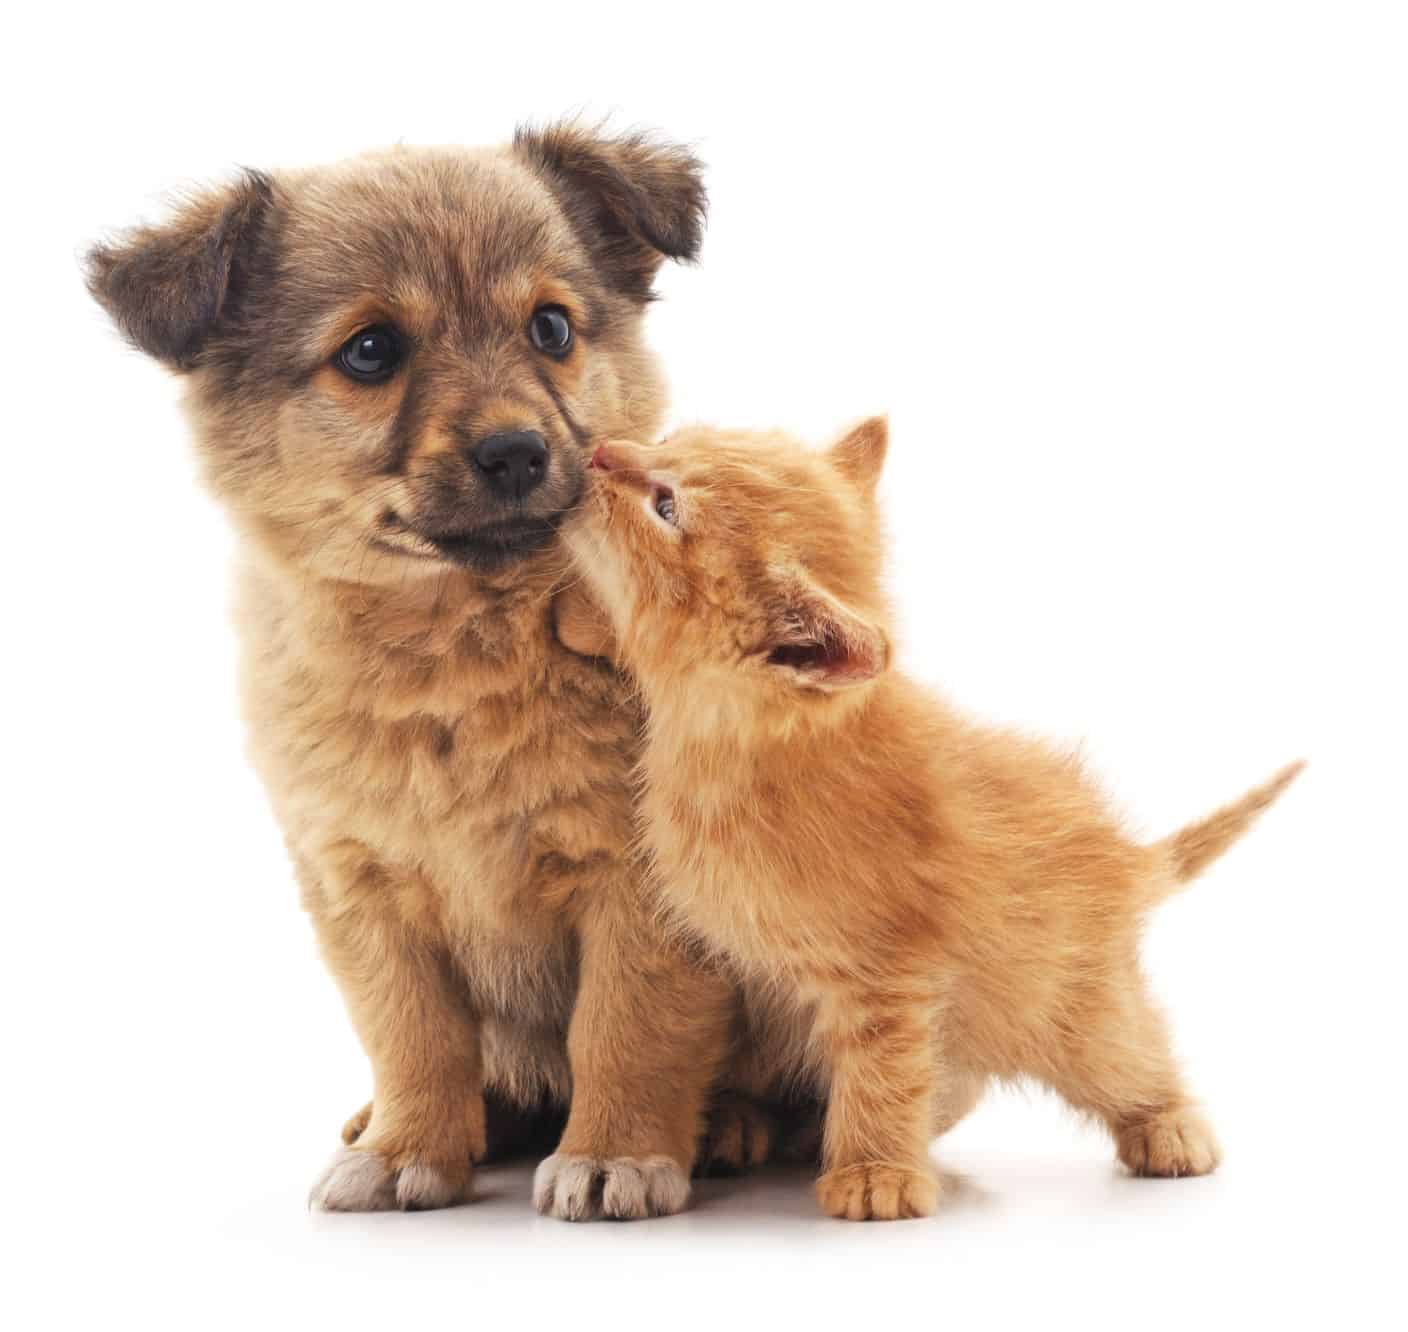 Cute puppy and kitten.